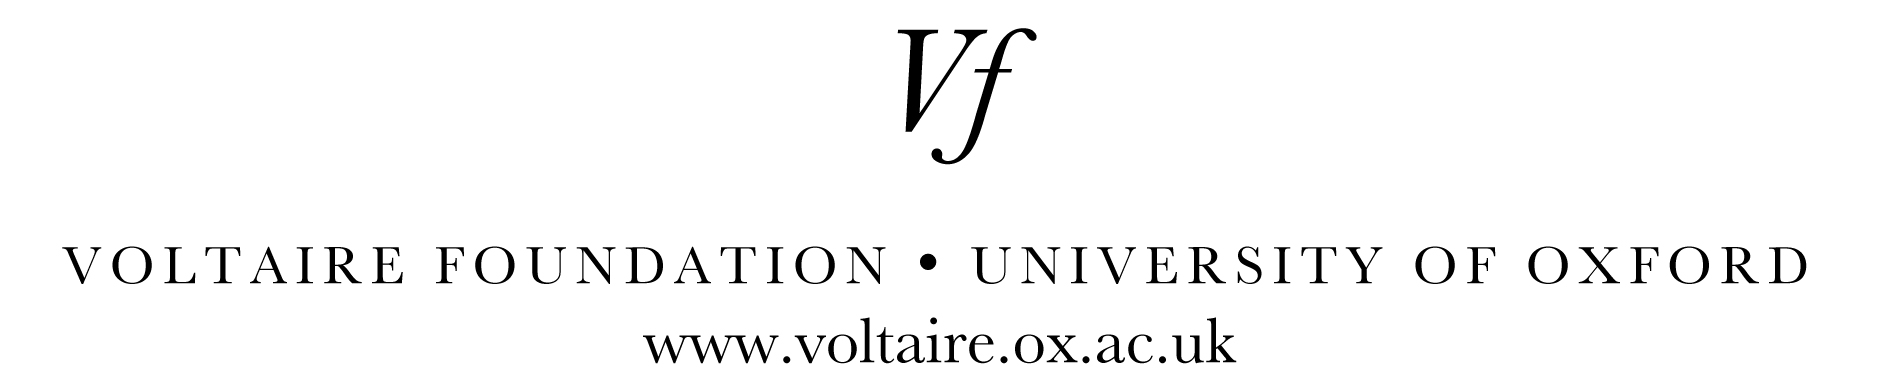 Voltaire Foundation, University of Oxford